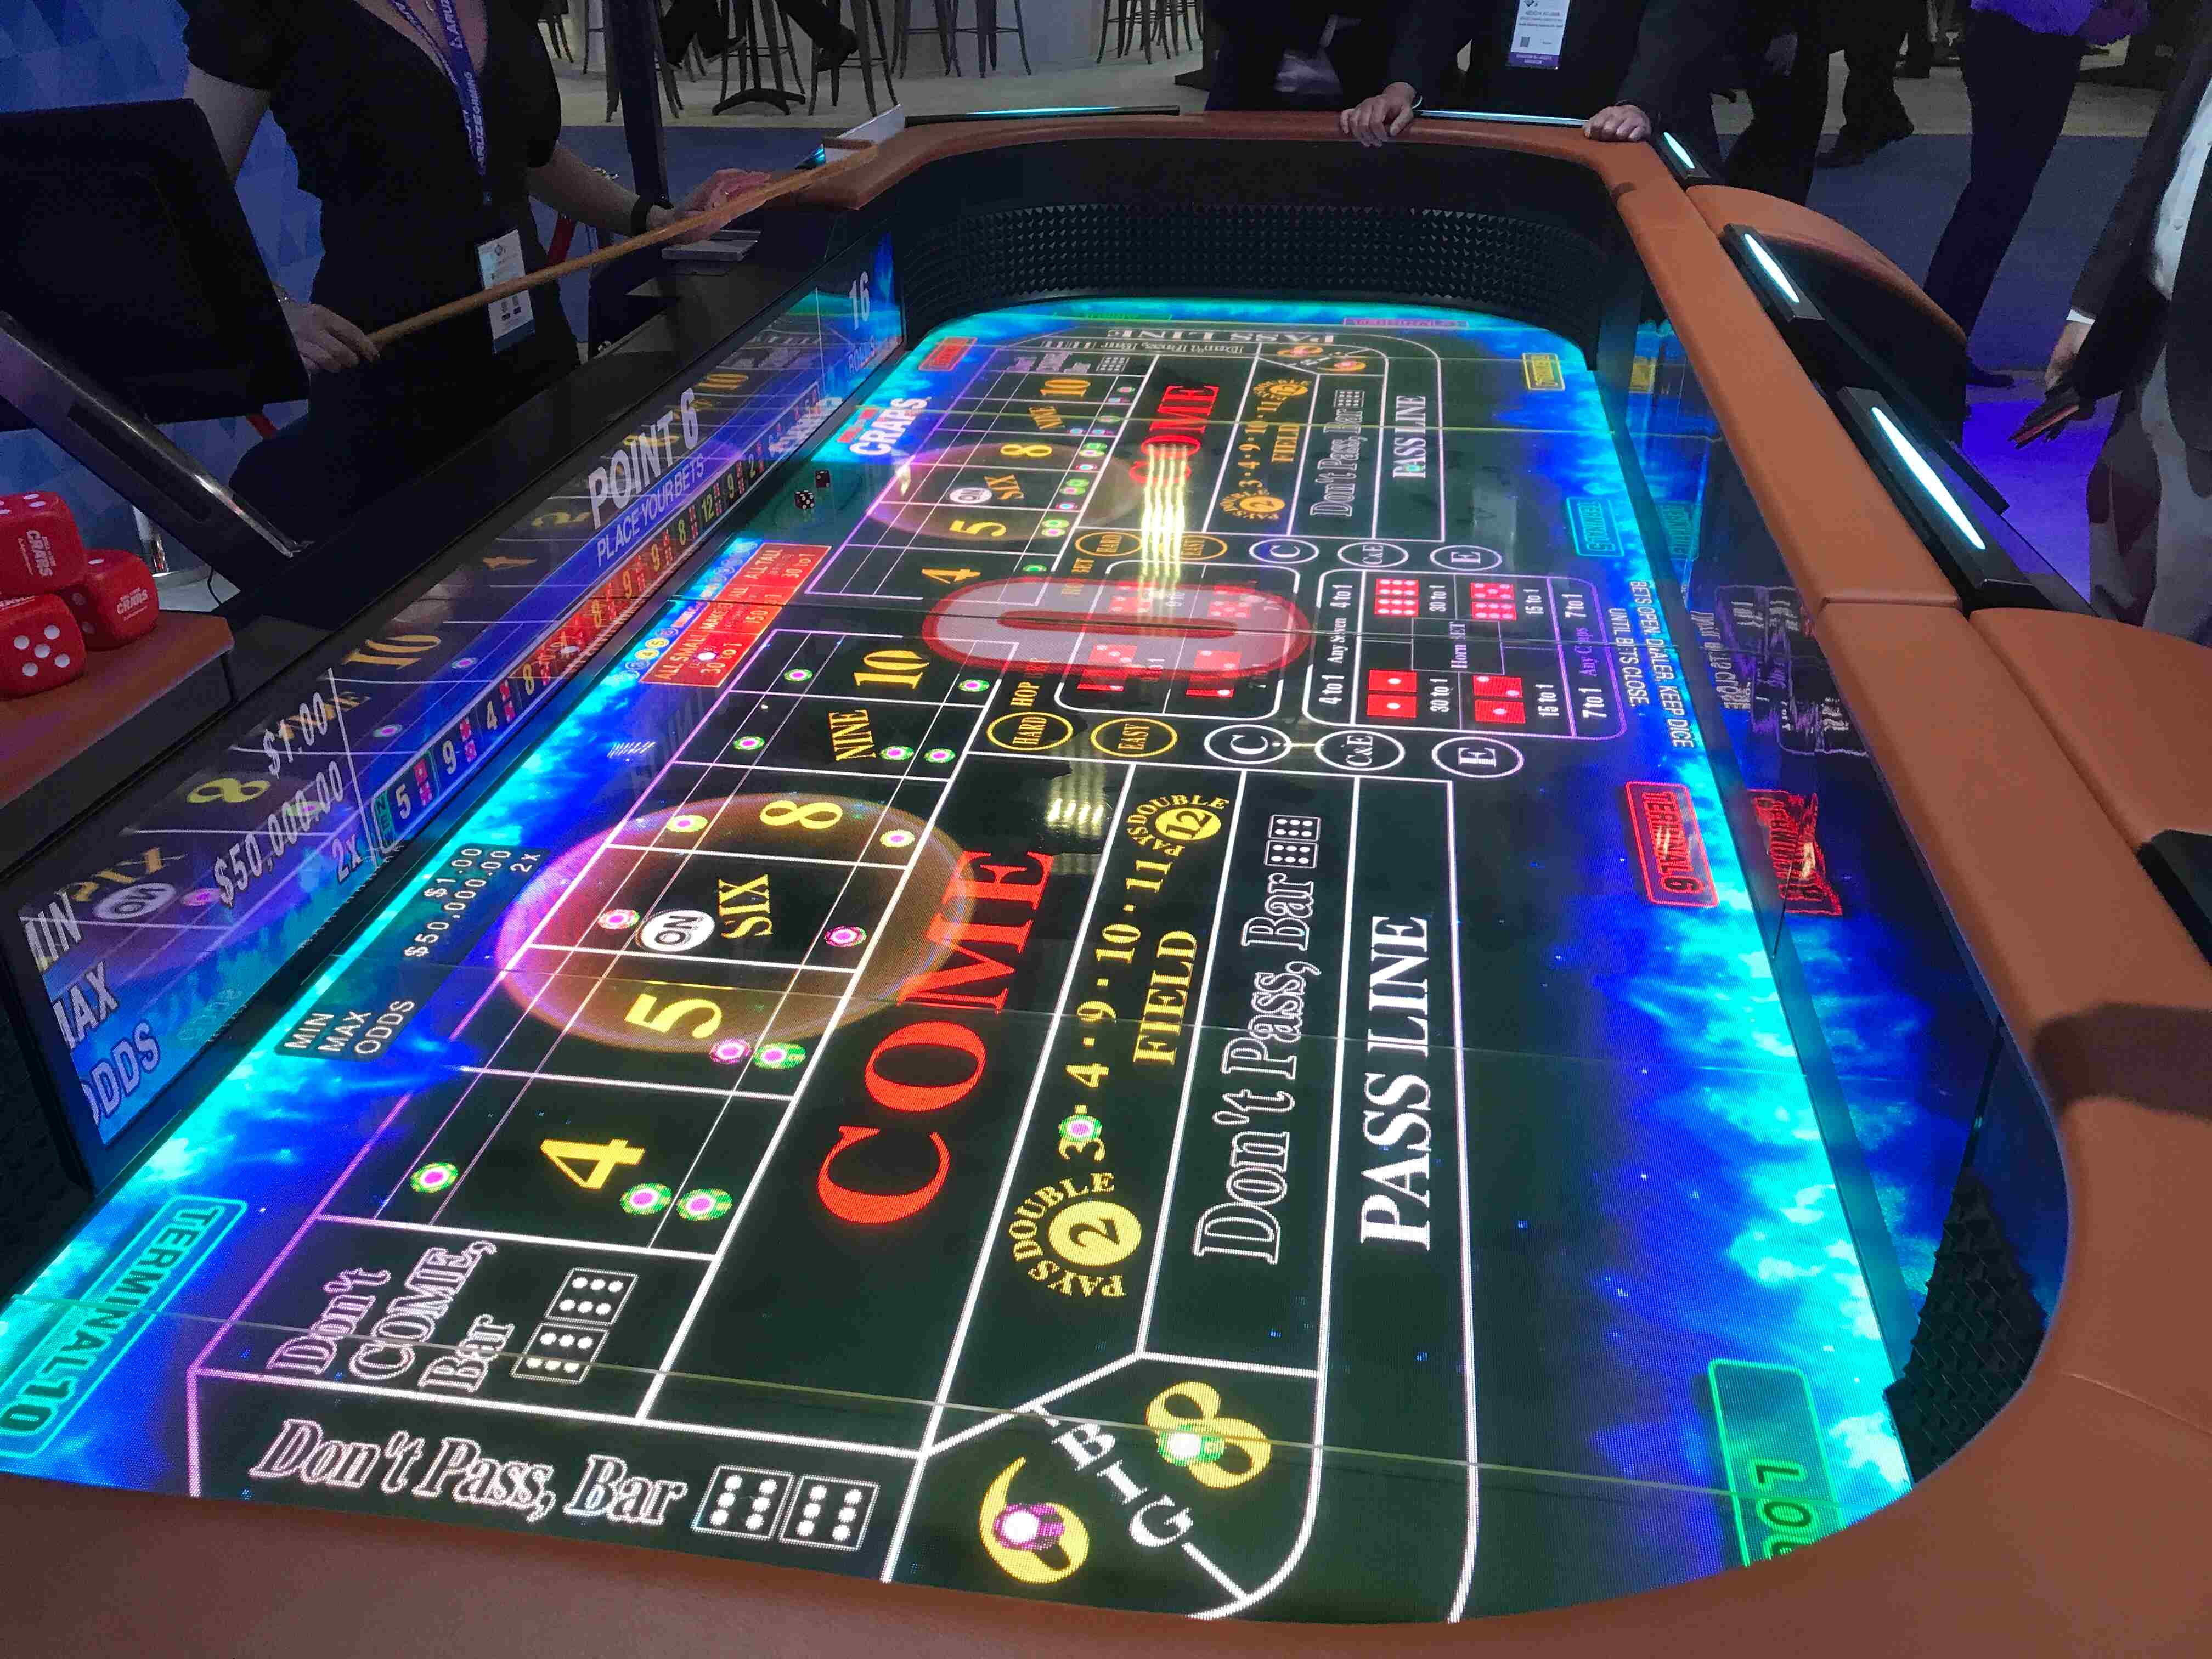 Electronic craps table with field bet shown